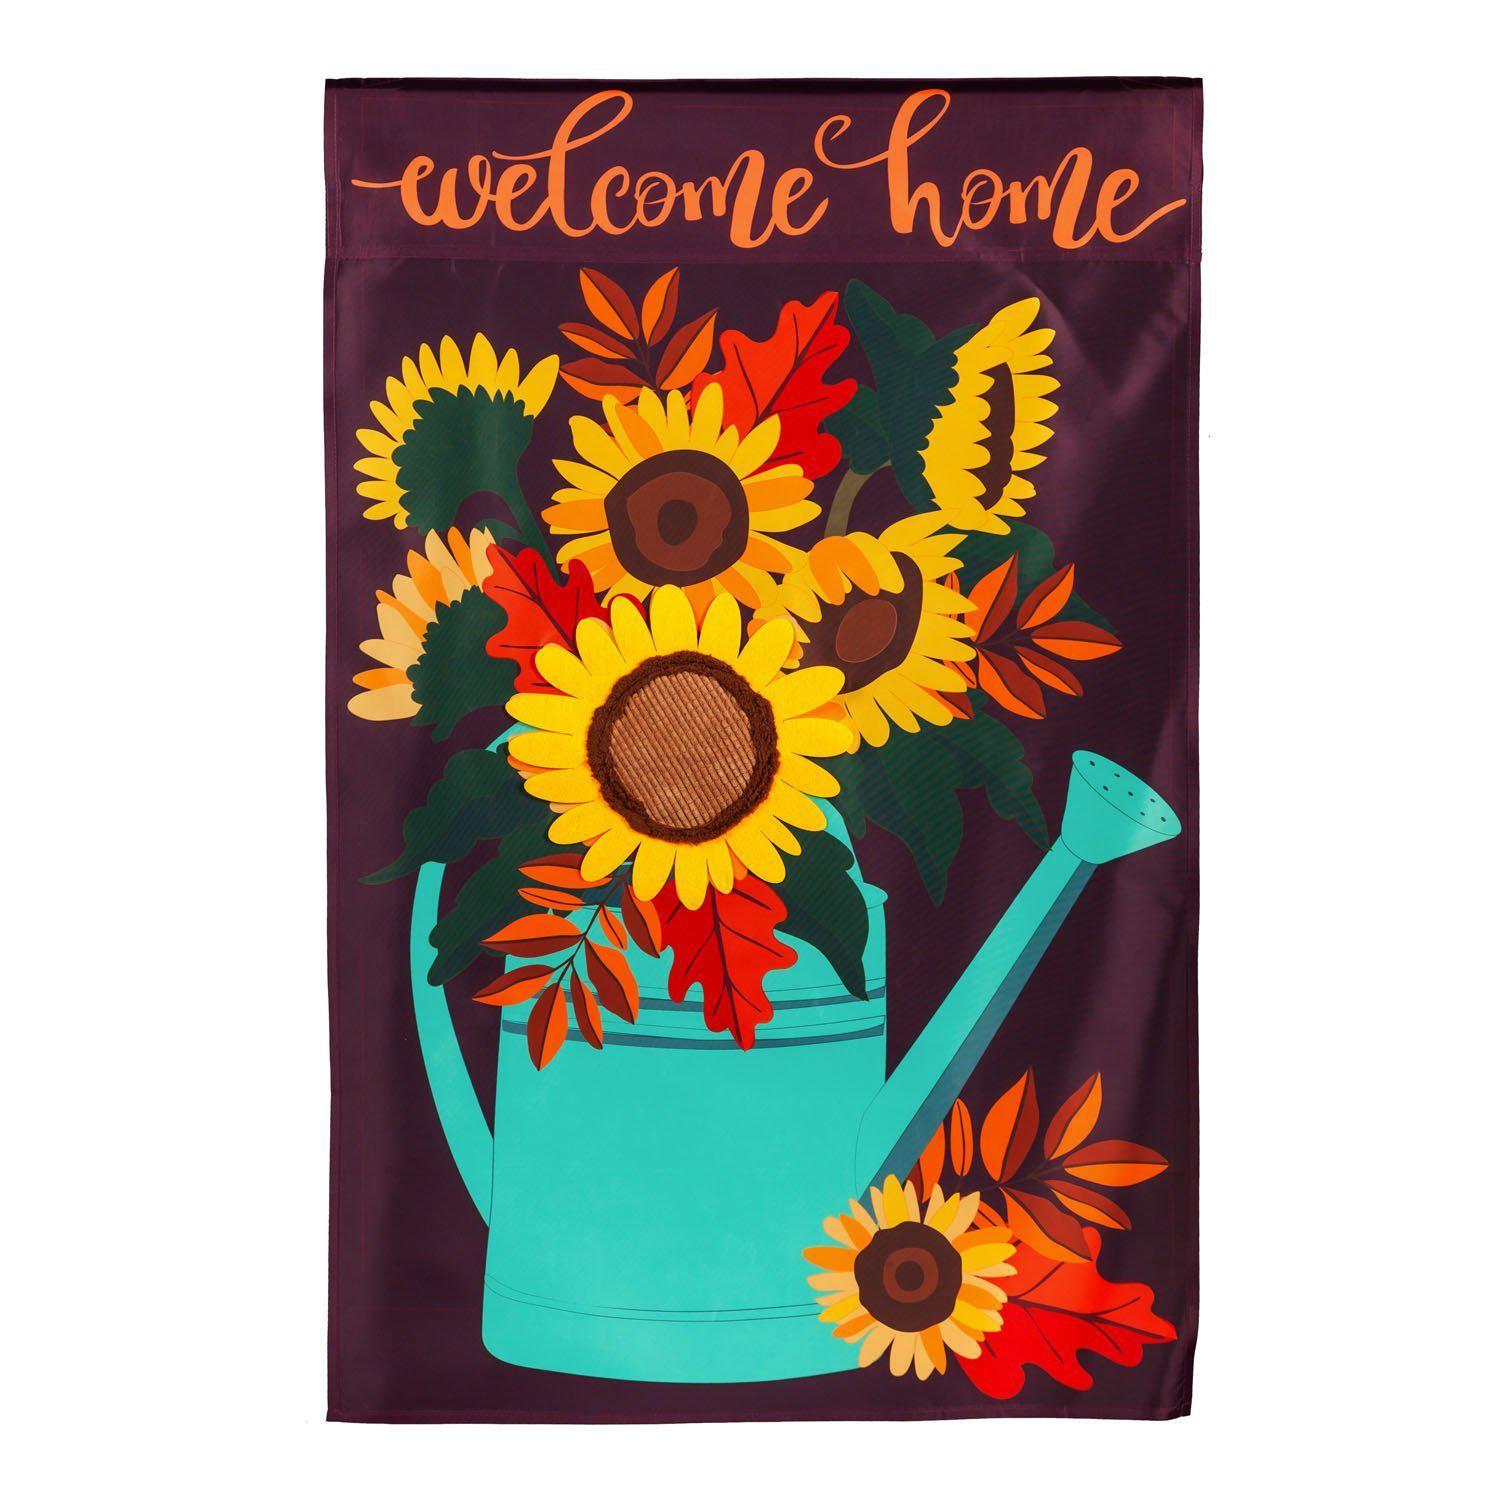 The Sunflower Watering Can house banner features a watering can filled with sunflowers and the words "Welcome Home". 